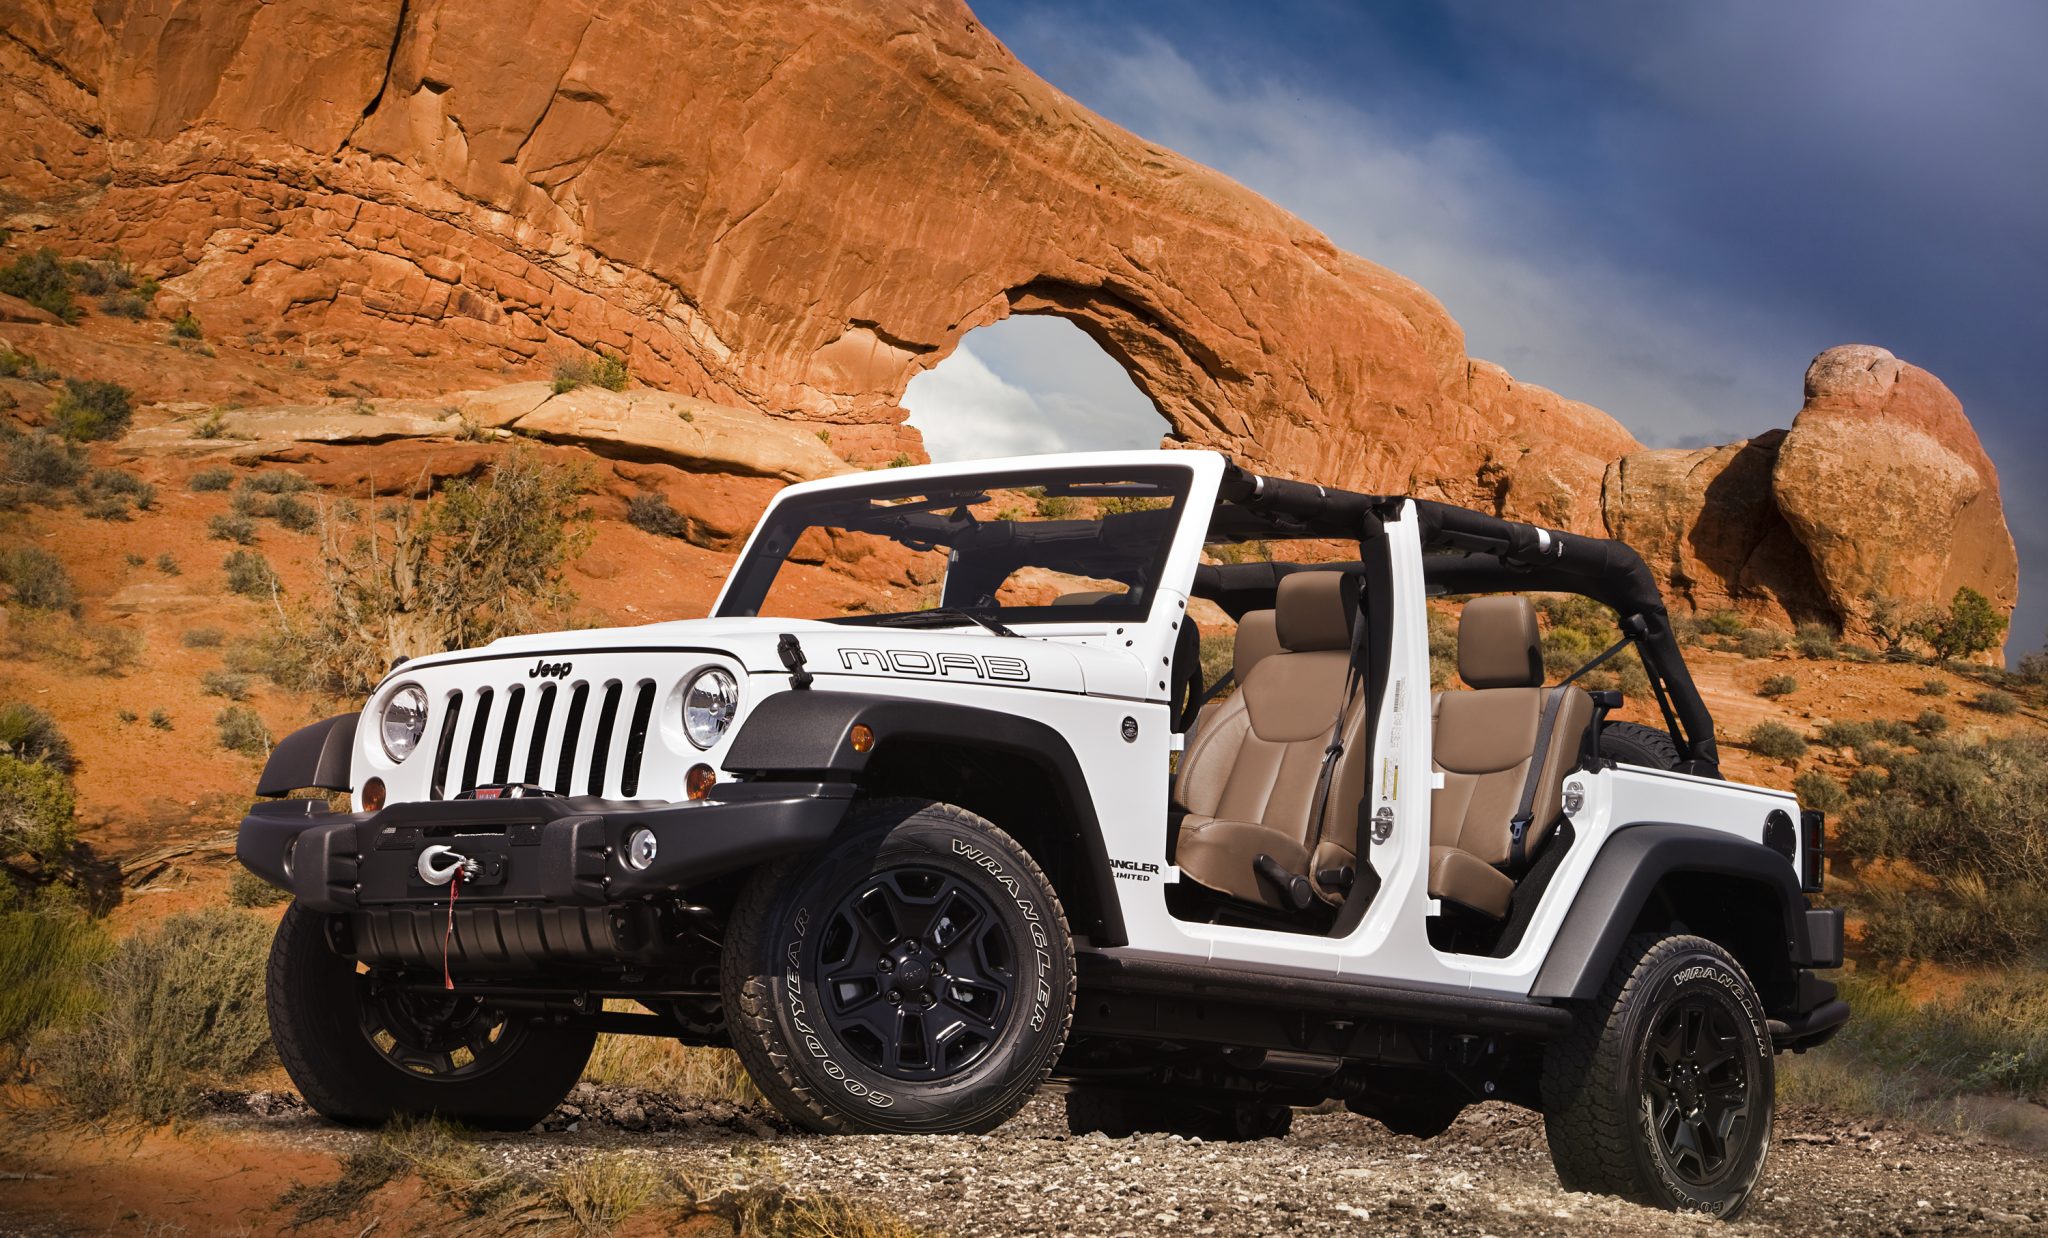 2013 Jeep Wrangler Unlimited Overview The News Wheel